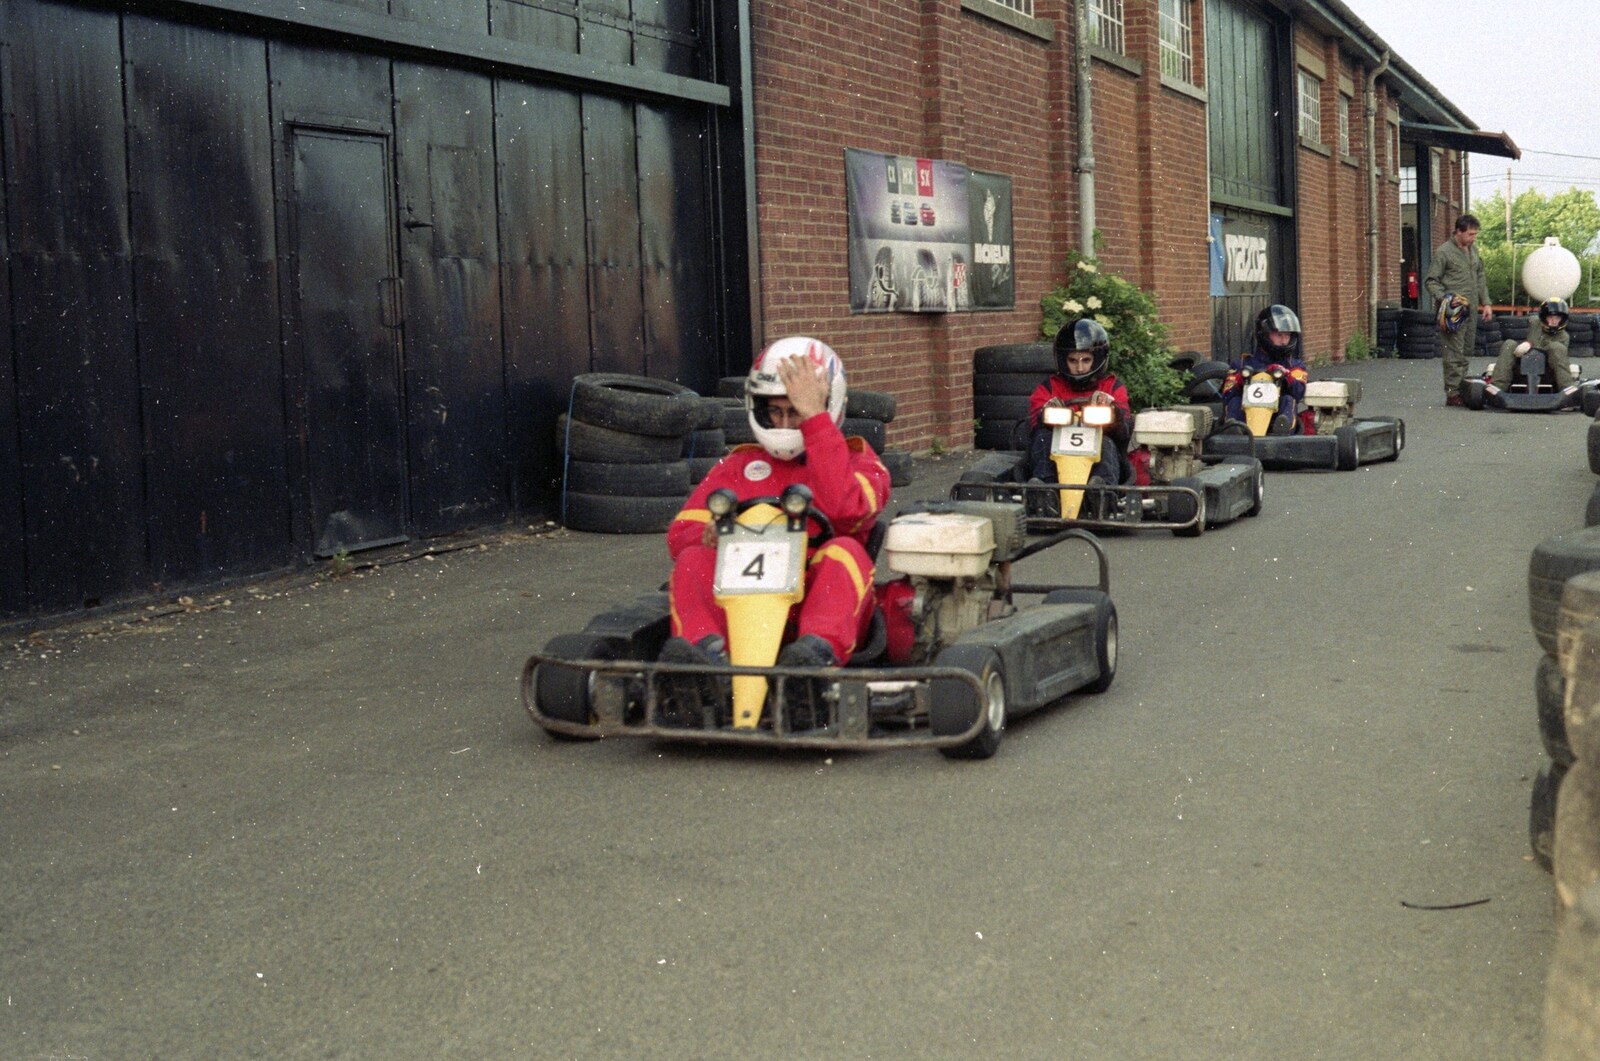 Raj gets helmeted up and trundles off from Hamish's Wine and CISU Go-Karting, Caxton, Cambridge - 23rd June 1998